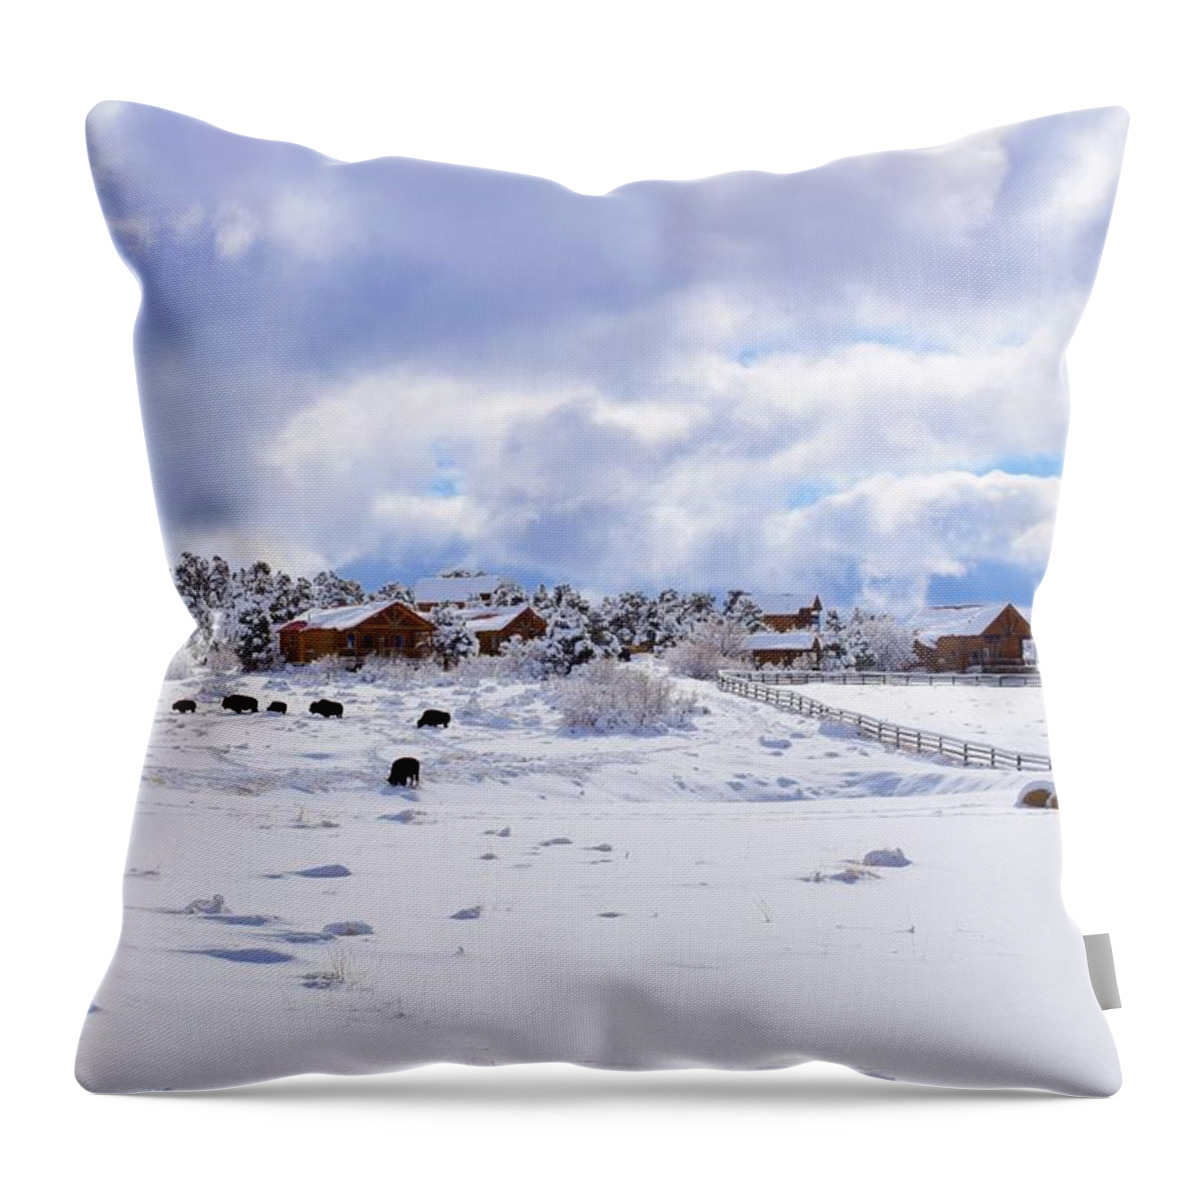 Zion Throw Pillow featuring the photograph Snow Farmhouse Zion by Bnte Creations